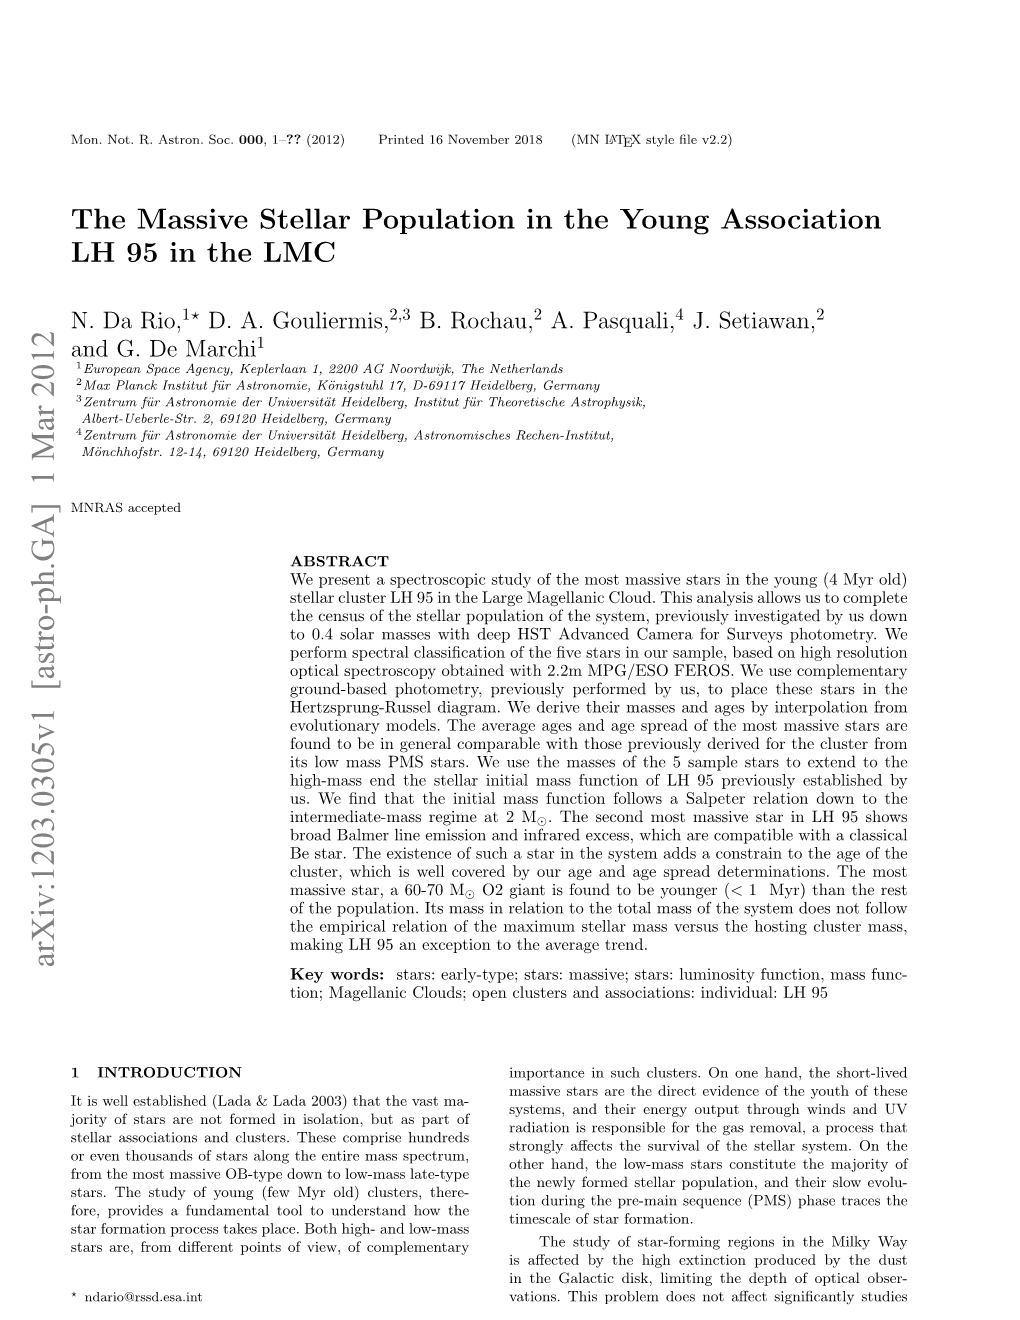 The Massive Stellar Population in the Young Association LH 95 in the LMC